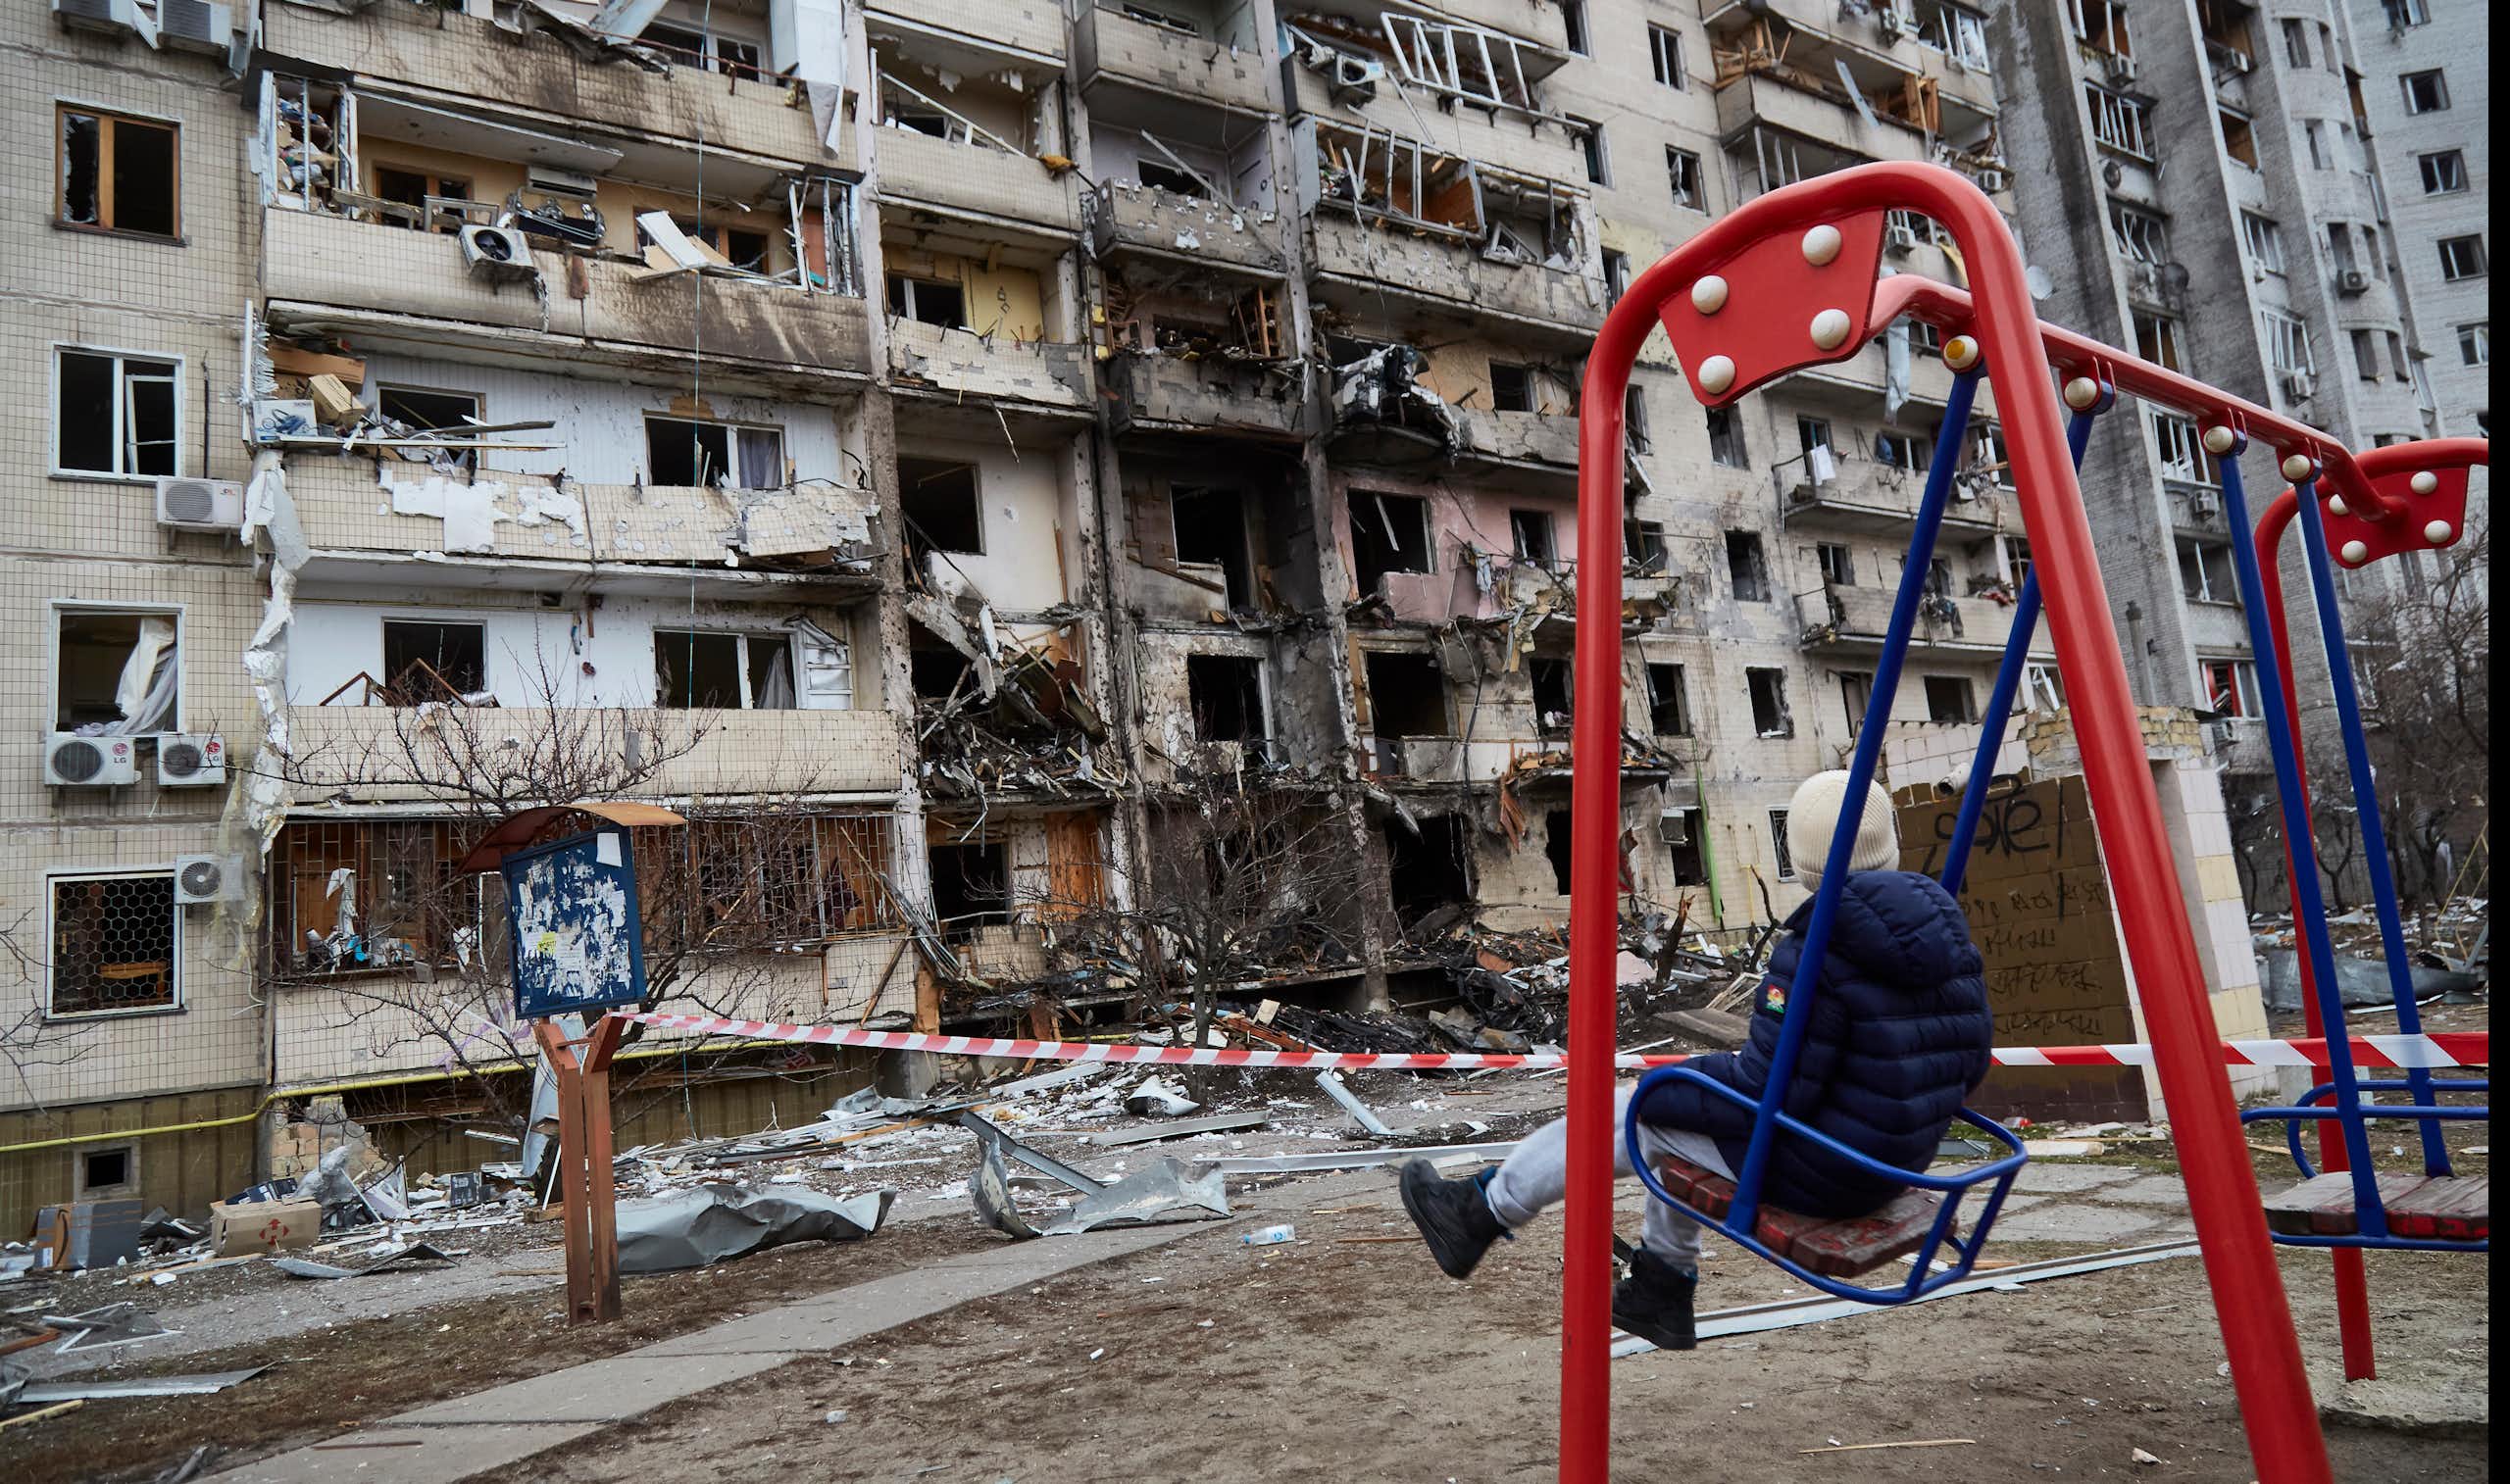 A child on a swing looks at a destroyed building.